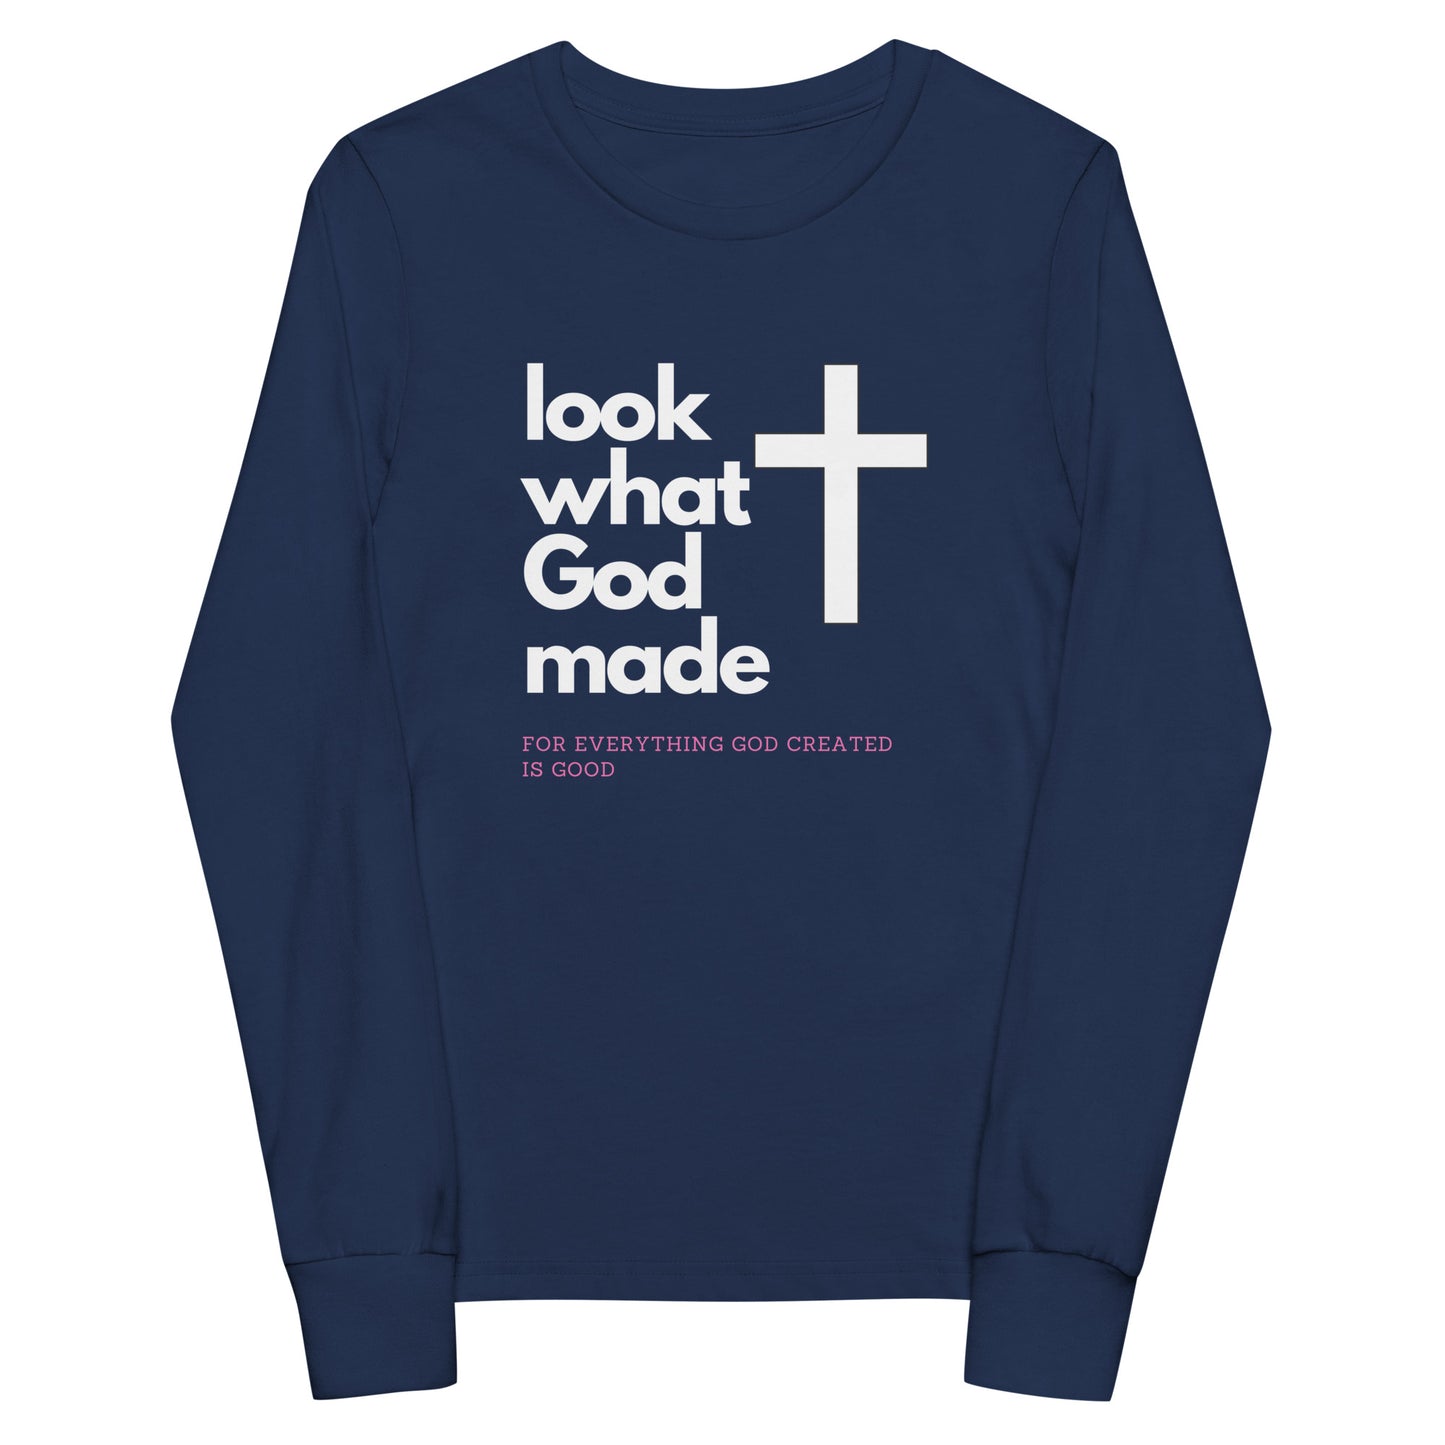 Look what God made Youth long sleeve tee